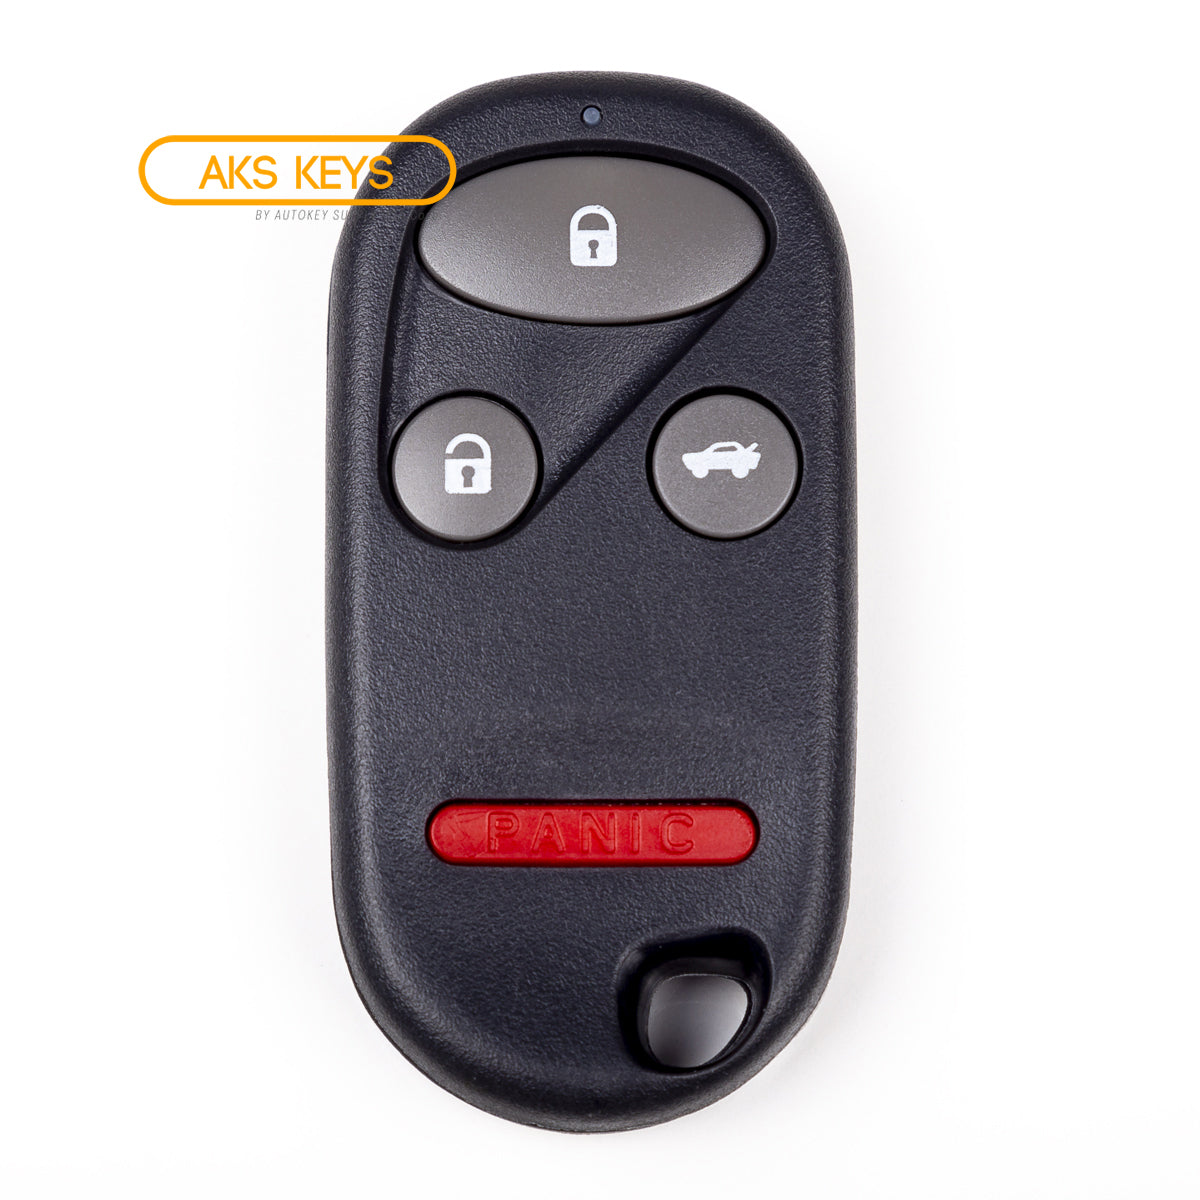 Keyless Remote Fob for Acura TSX TL 2004 2005 2006 2007 2008 4B FCC# OUCG8D-387H-A